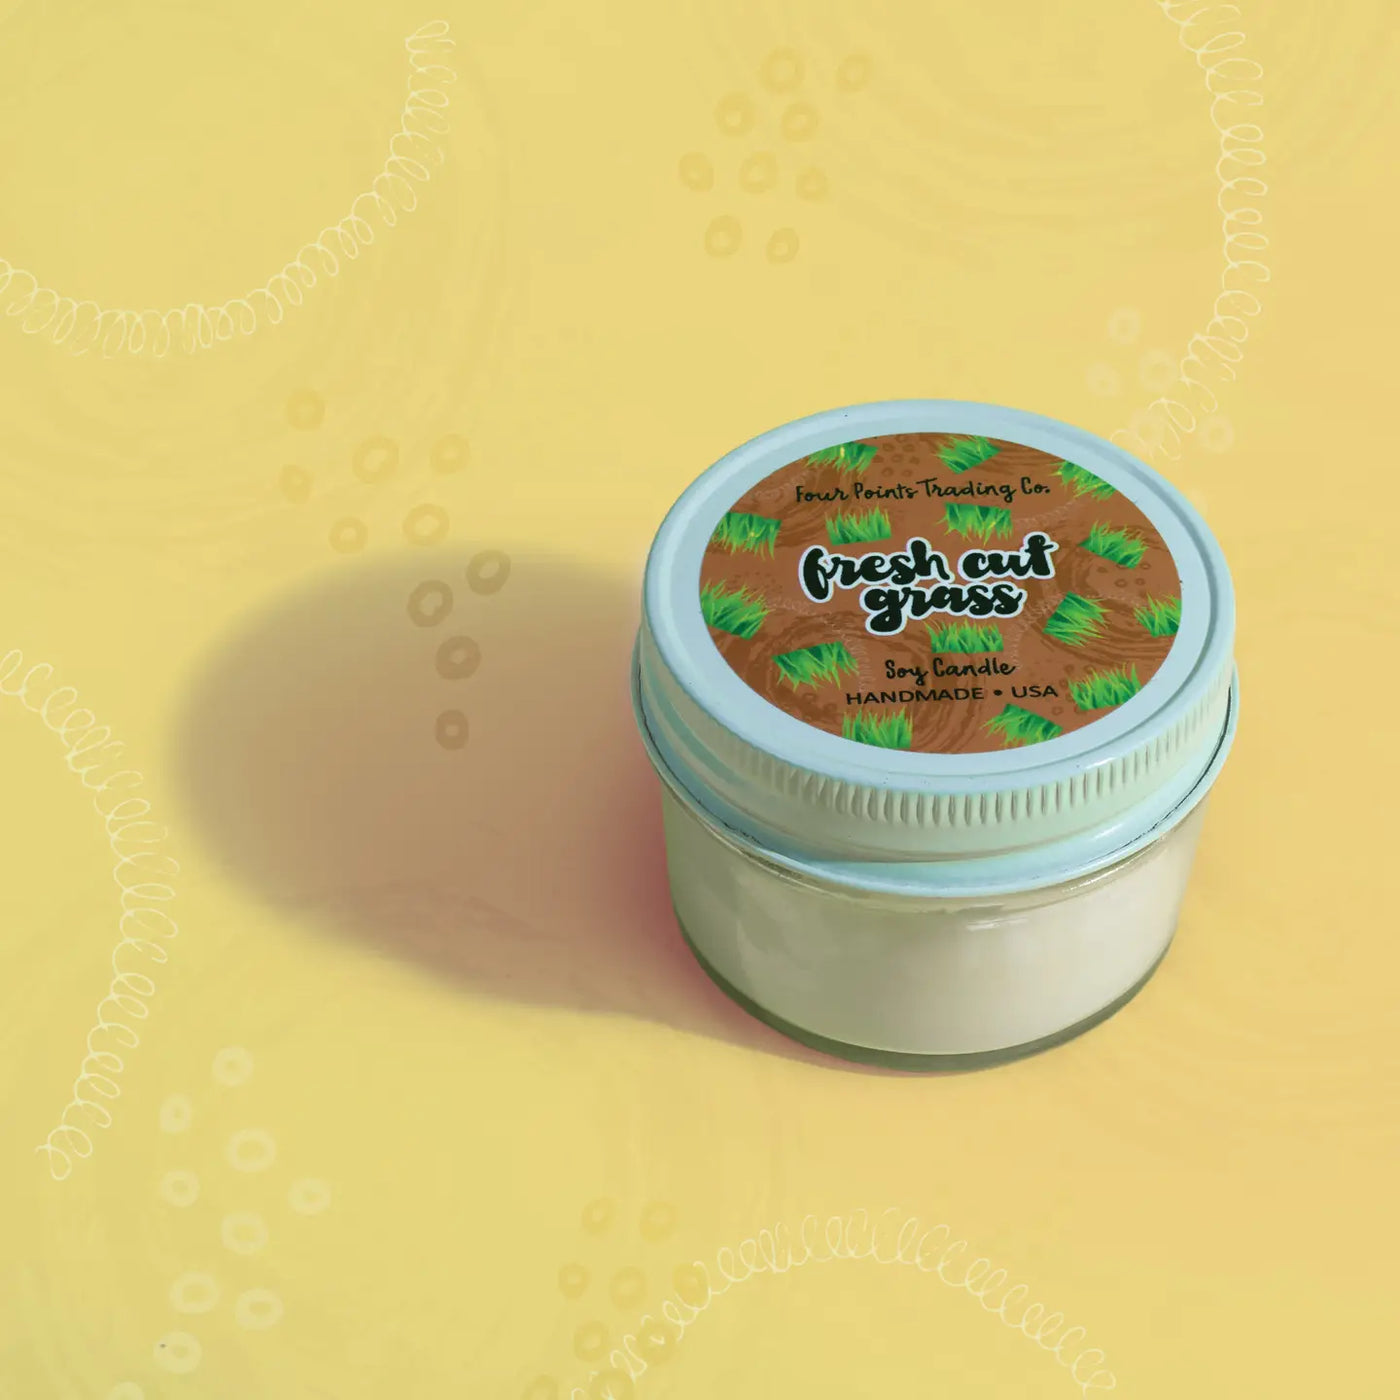 Fresh Cut Grass | Pop Scents | 4 oz Soy Candle